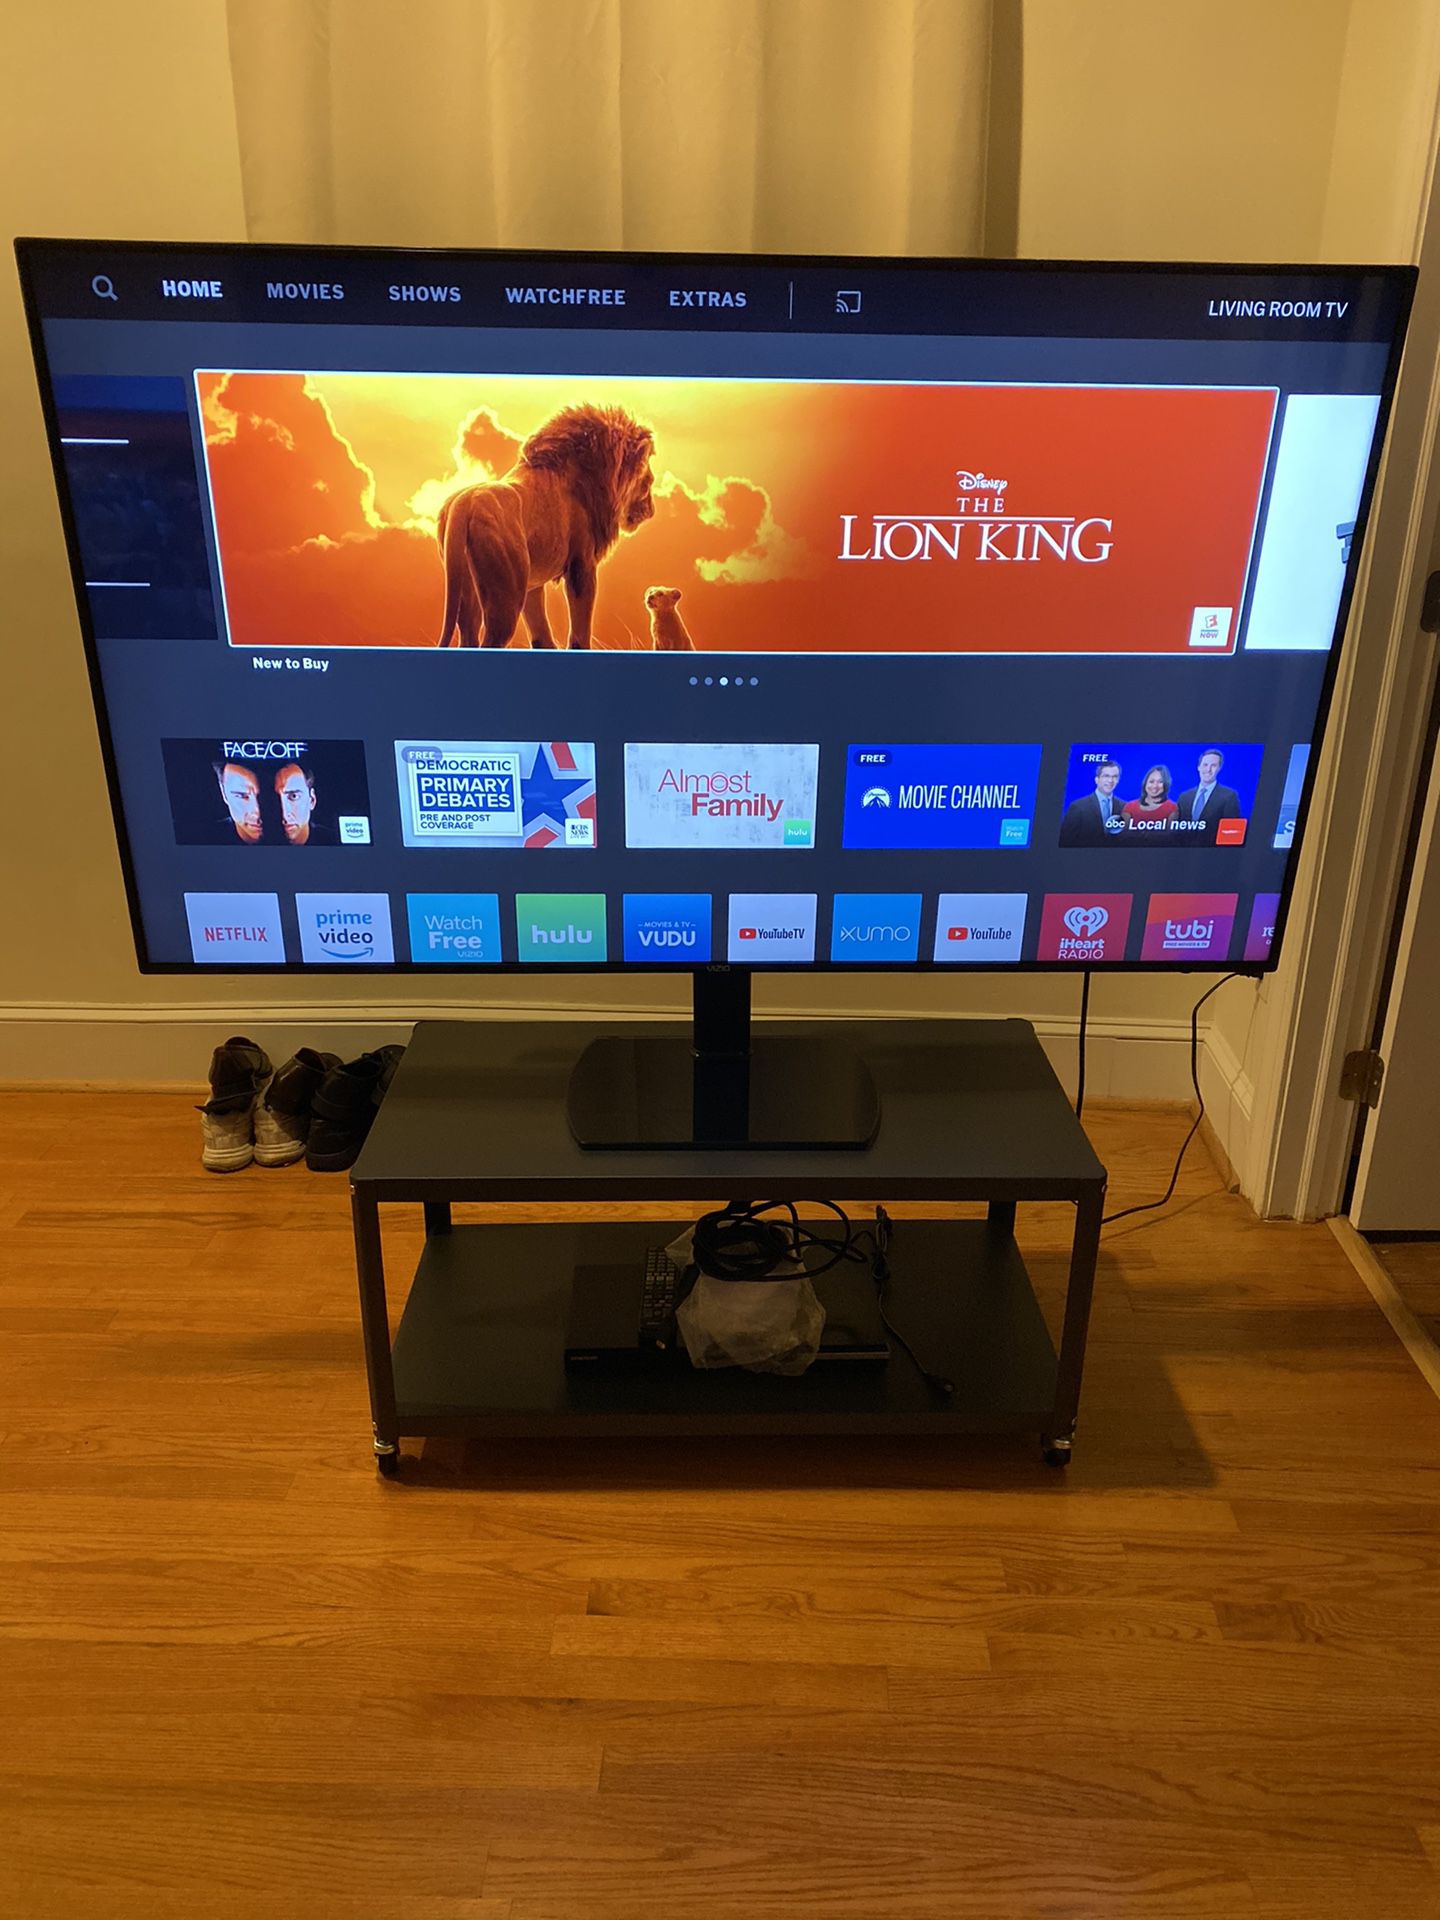 65 Inch Vizio 4k Ultra HD HDR Smart LED TV with built in Chromecast - Less than 3 months old + stand